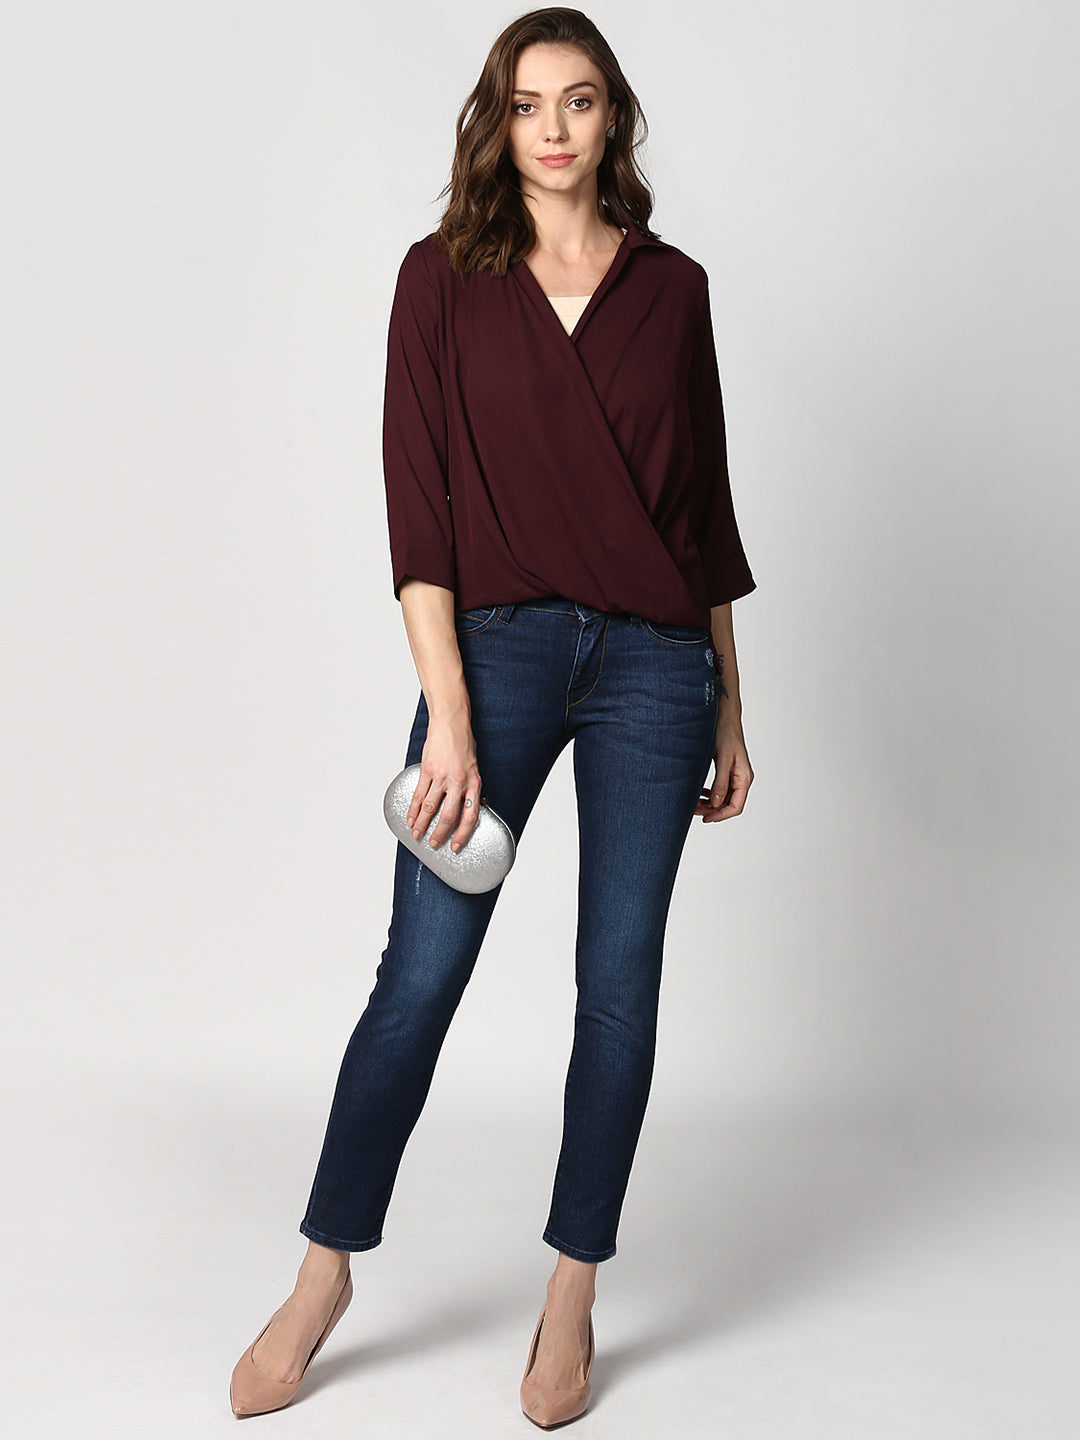 Women's Polyester Maroon Wrap Top